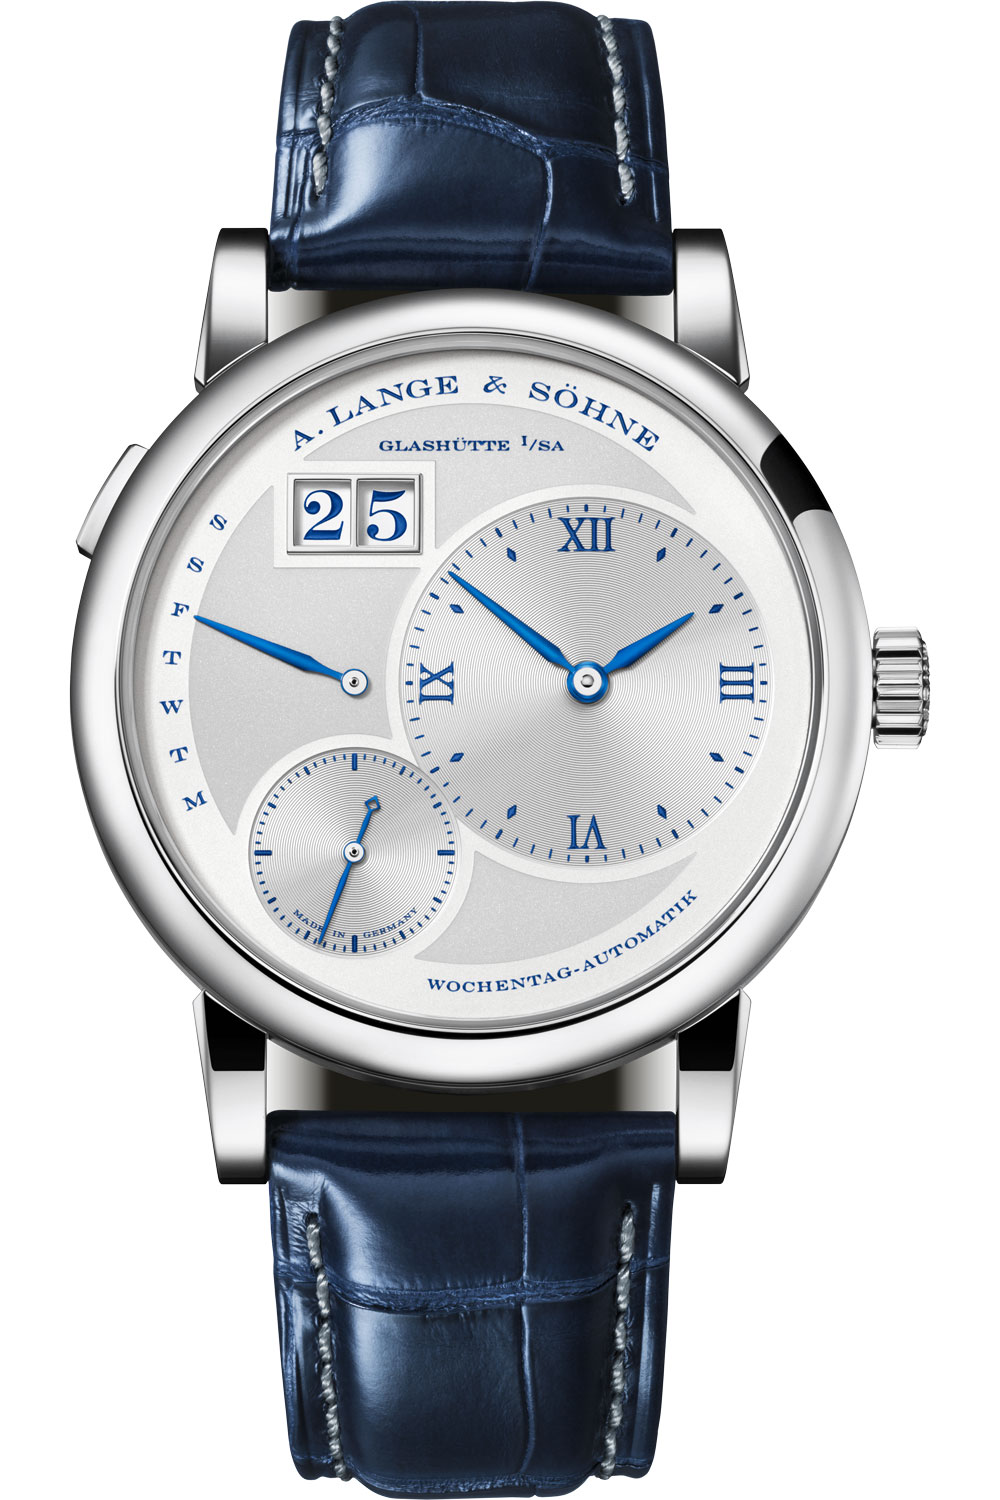 The Lange 1 Daymatic “25th Anniversary”